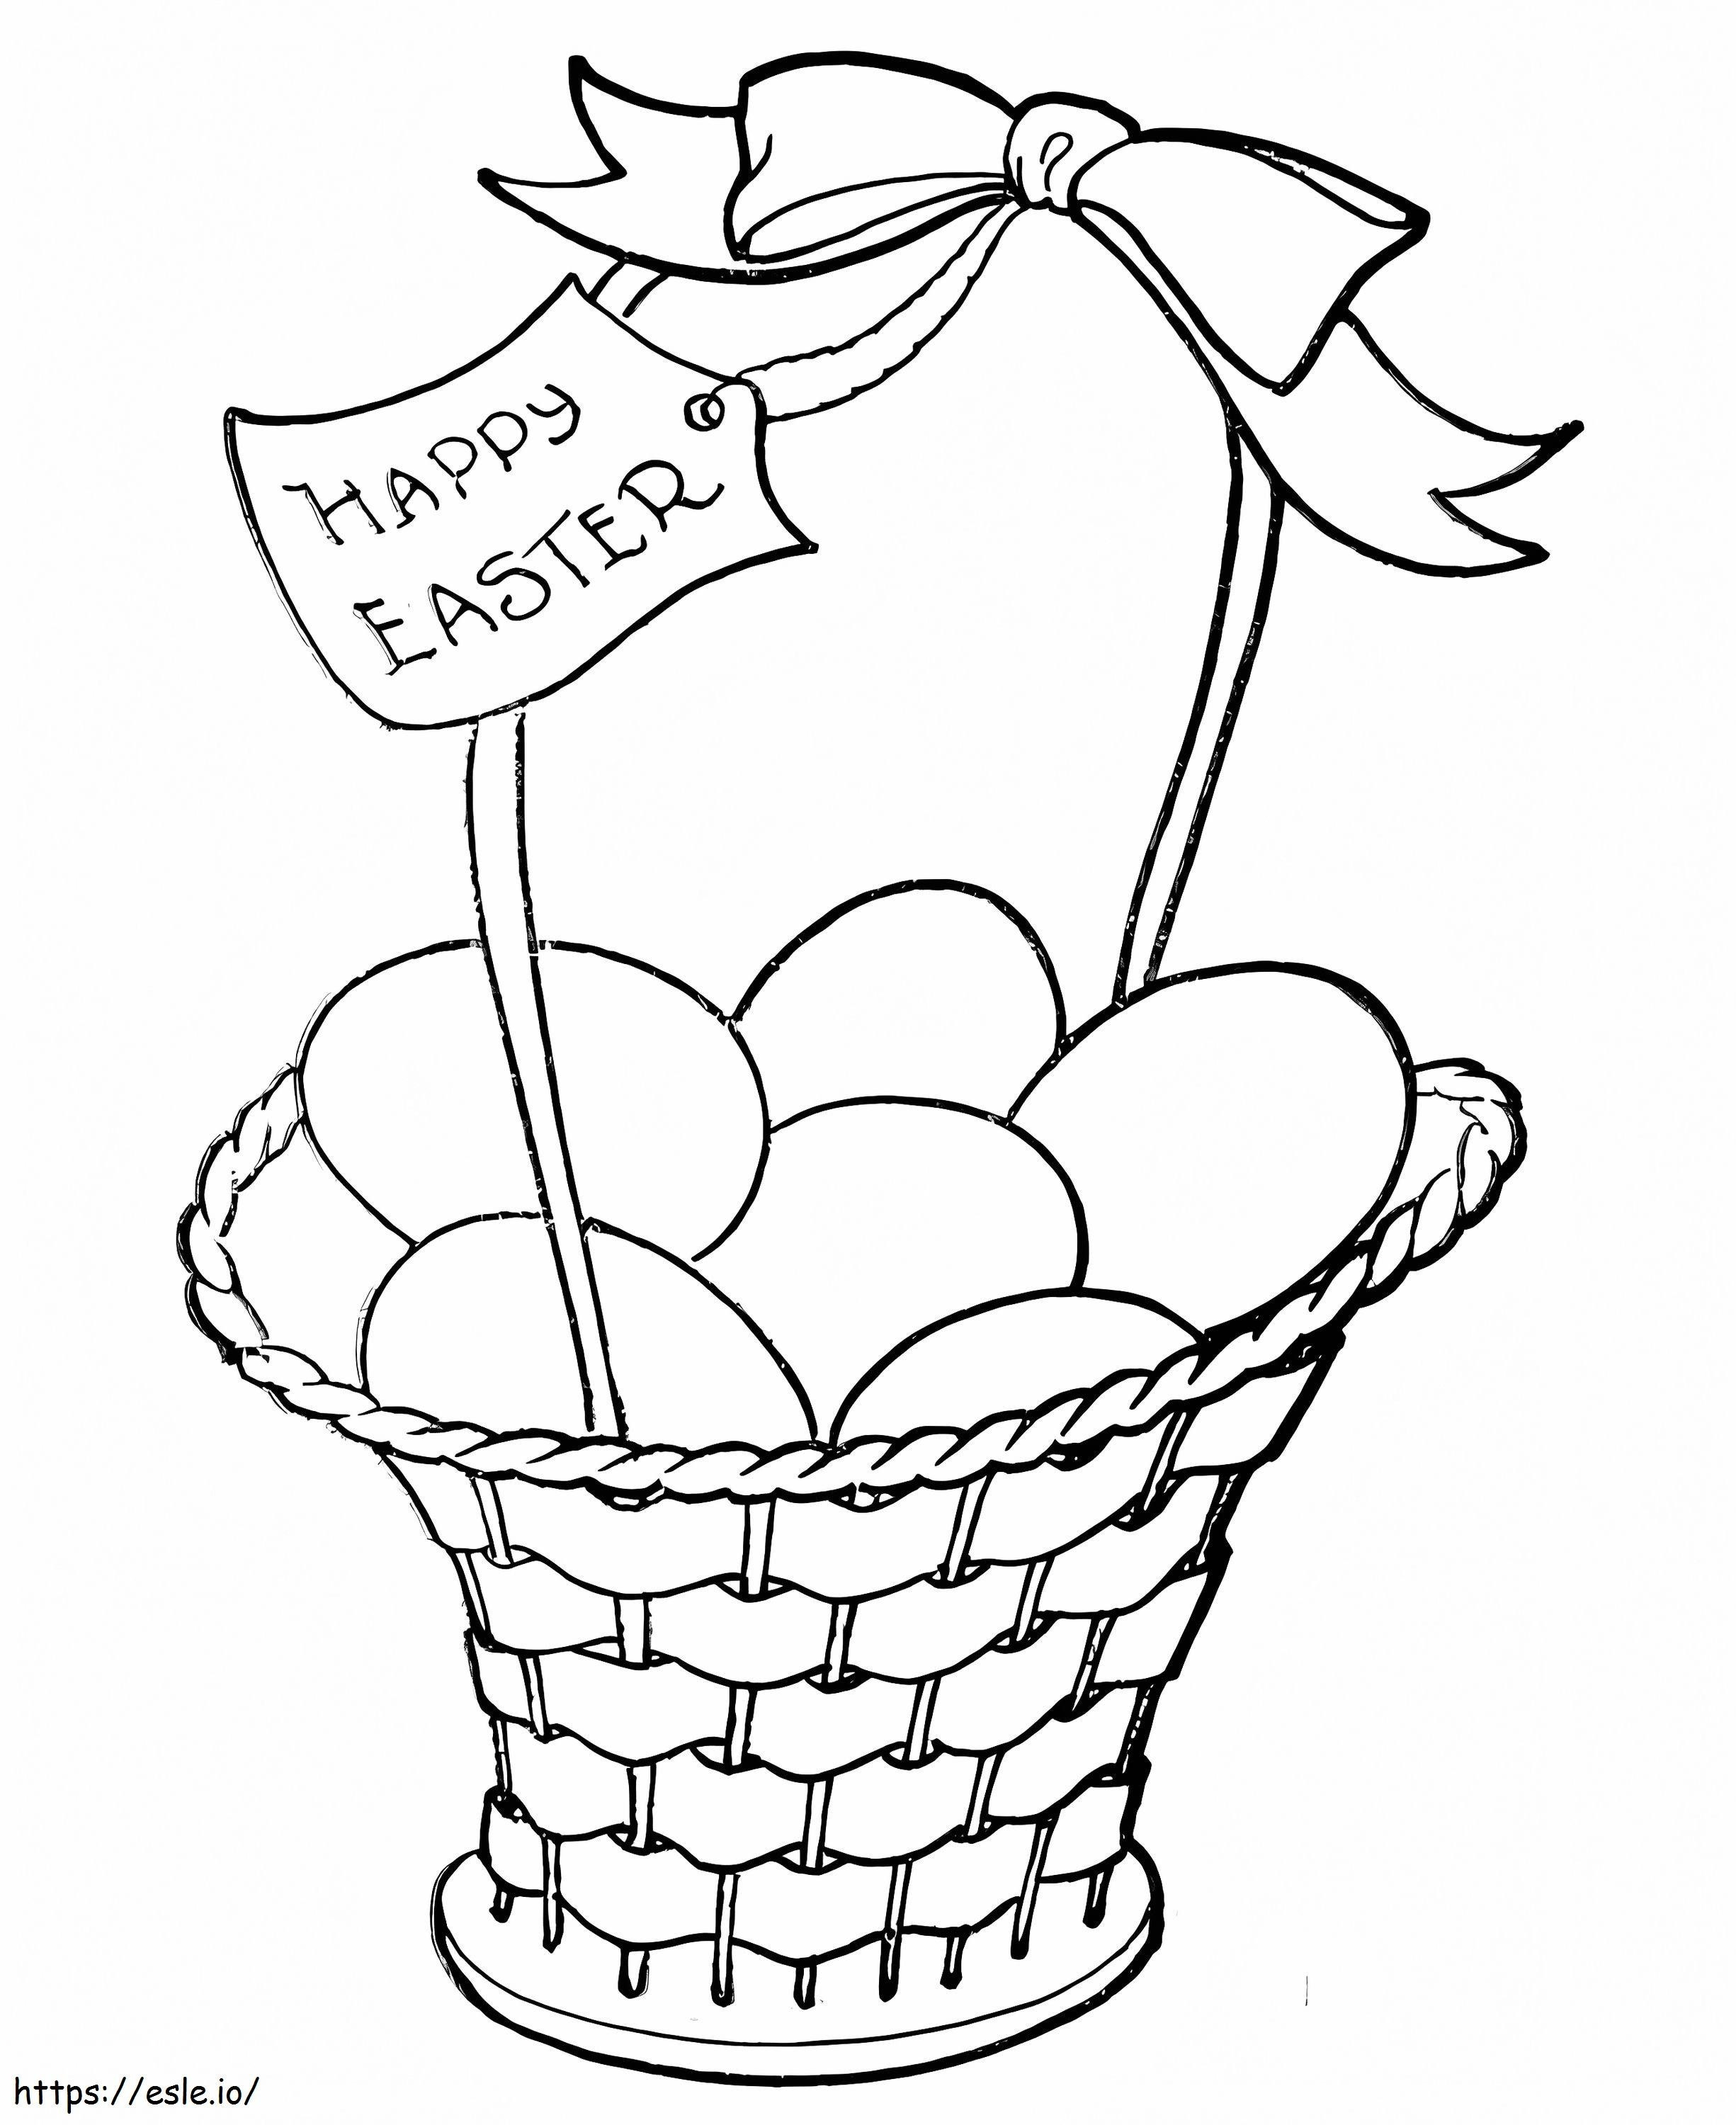 Happy Easter Basket 1 coloring page